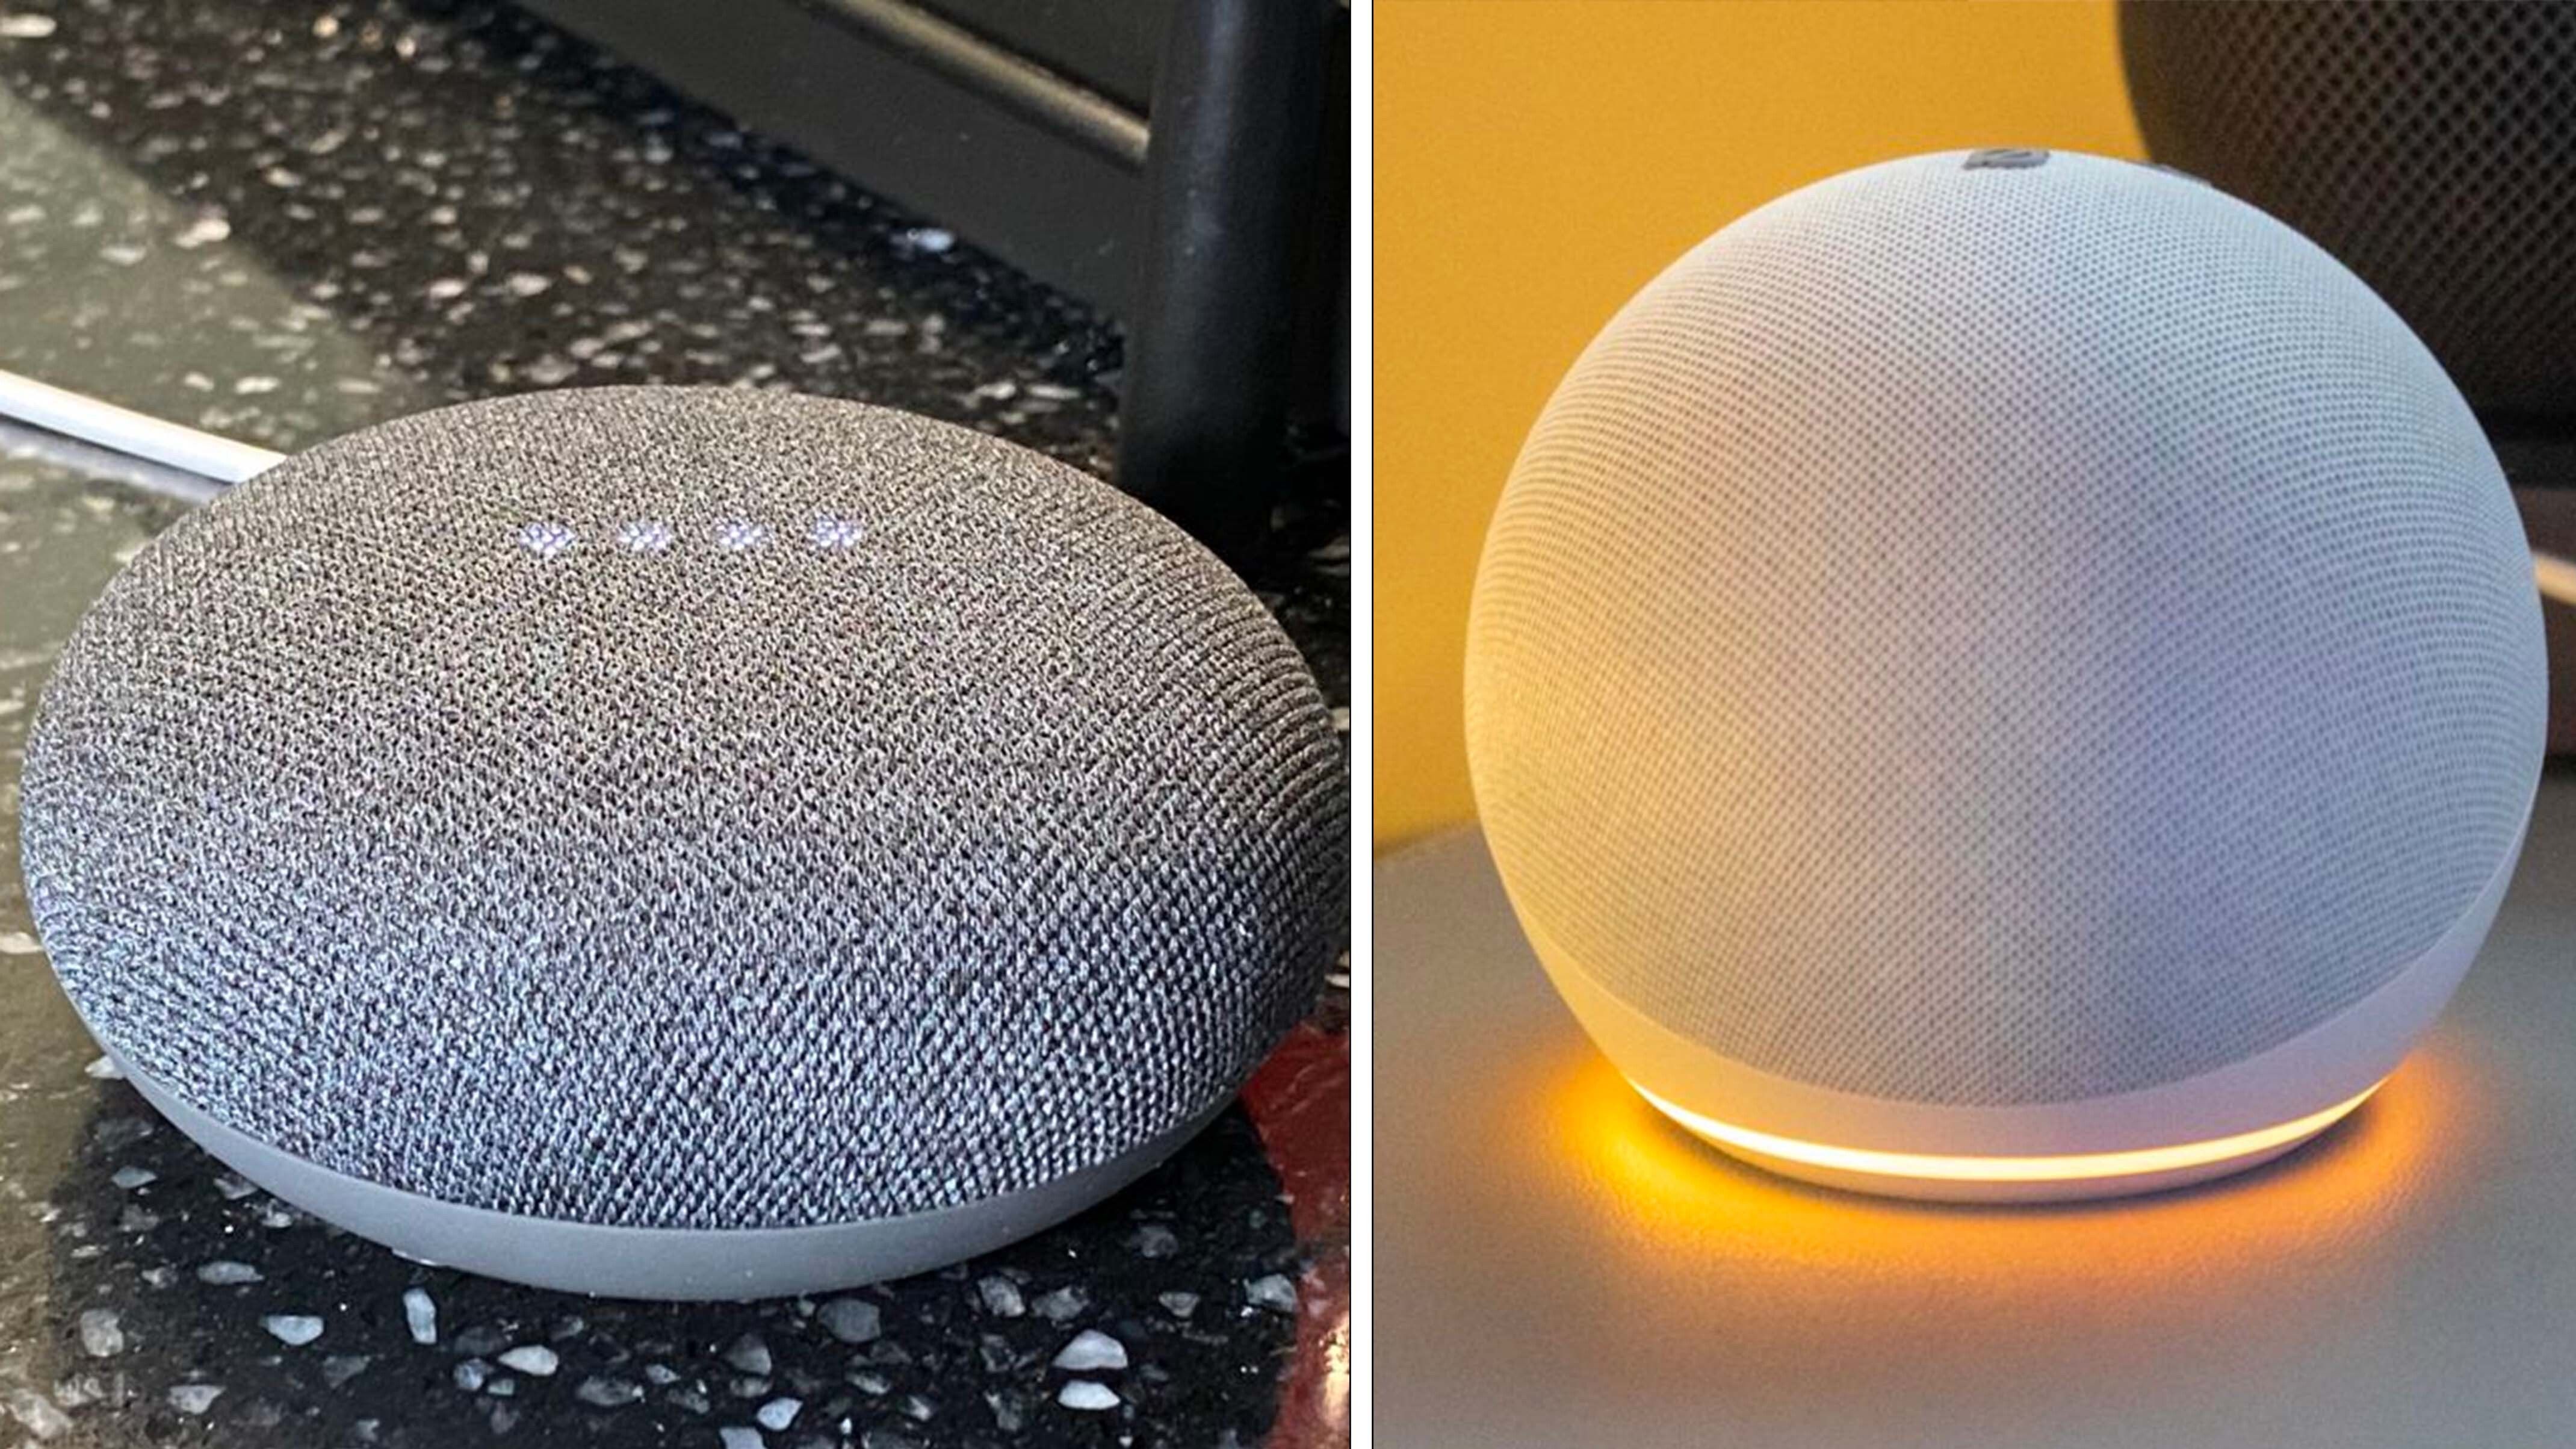 How to Set Up Your New Google Nest Speaker